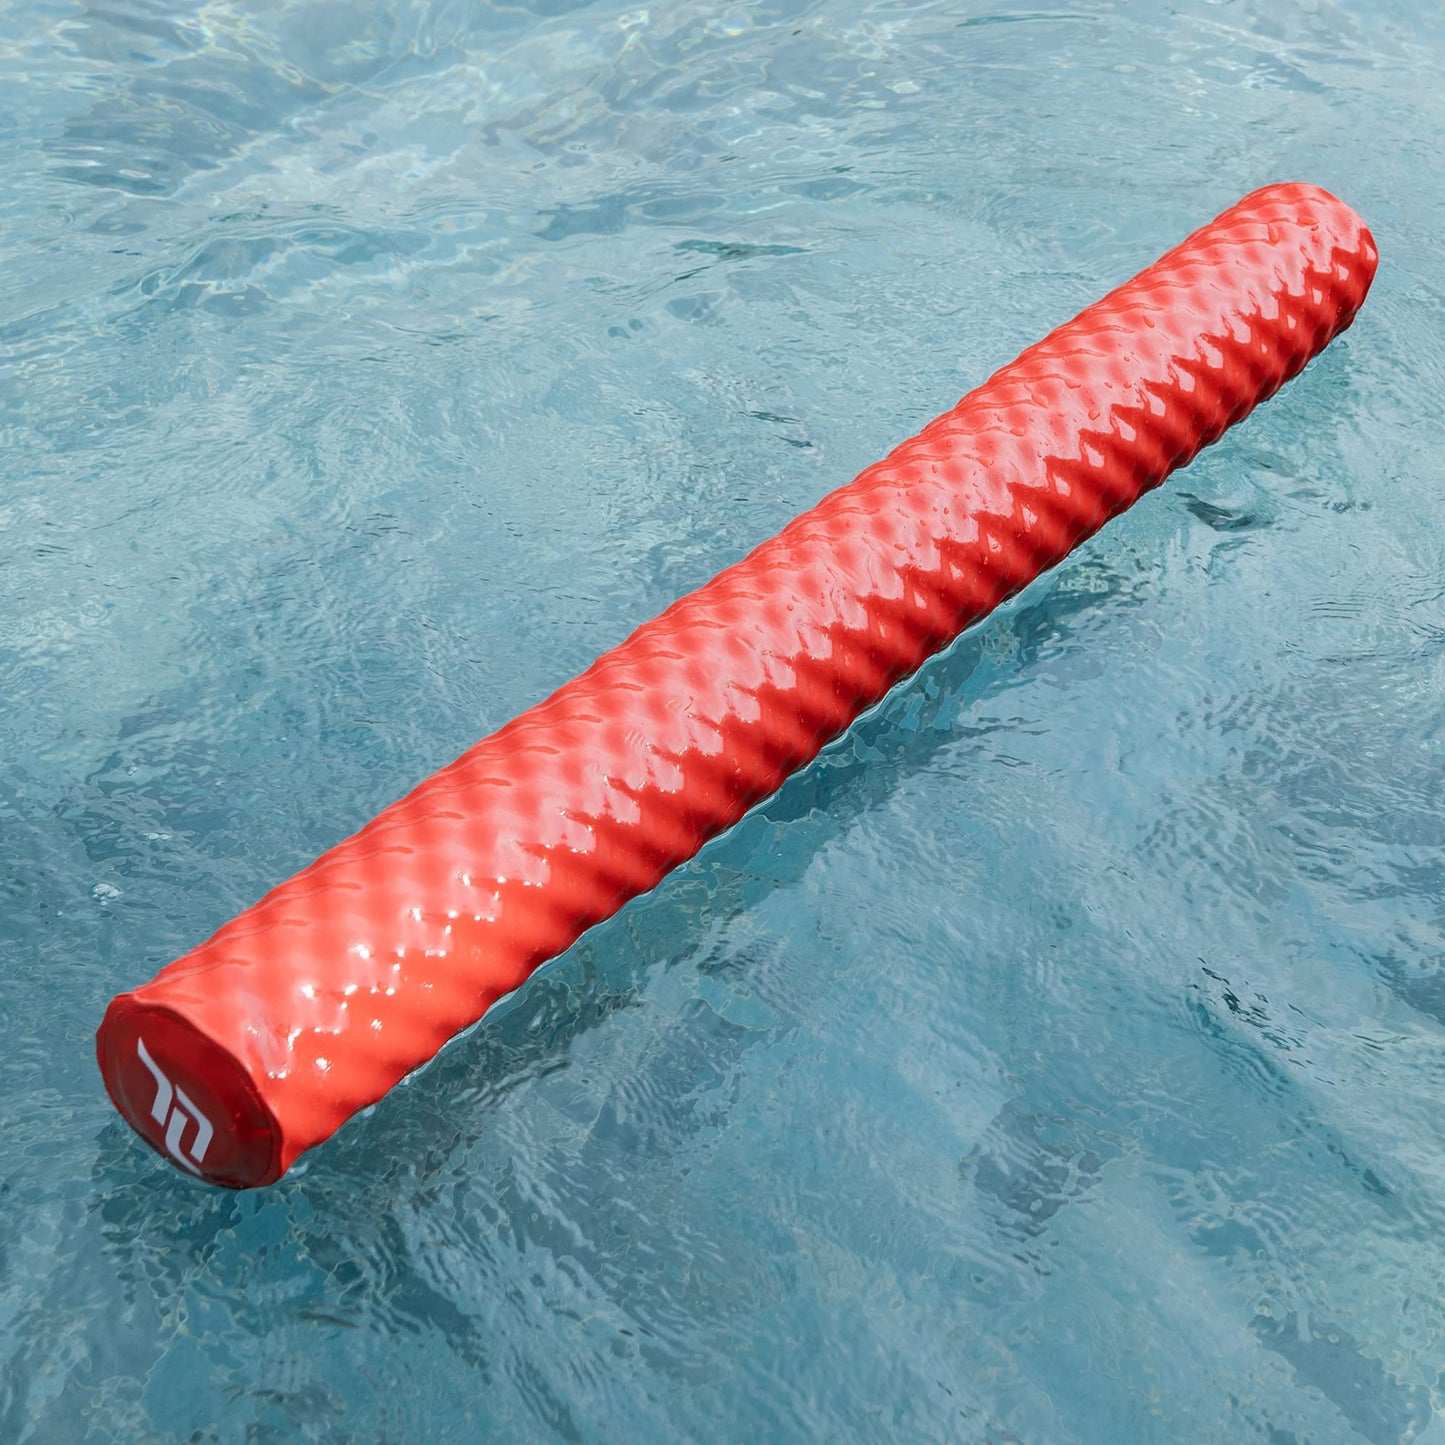 IMMERSA Jumbo Swimming Pool Noodles, Premium Water-Based Vinyl Coating and UV Resistant Soft Foam Noodles for Swimming and Floating, Lake Floats, Pool Floats for Adults and Kids. Pink